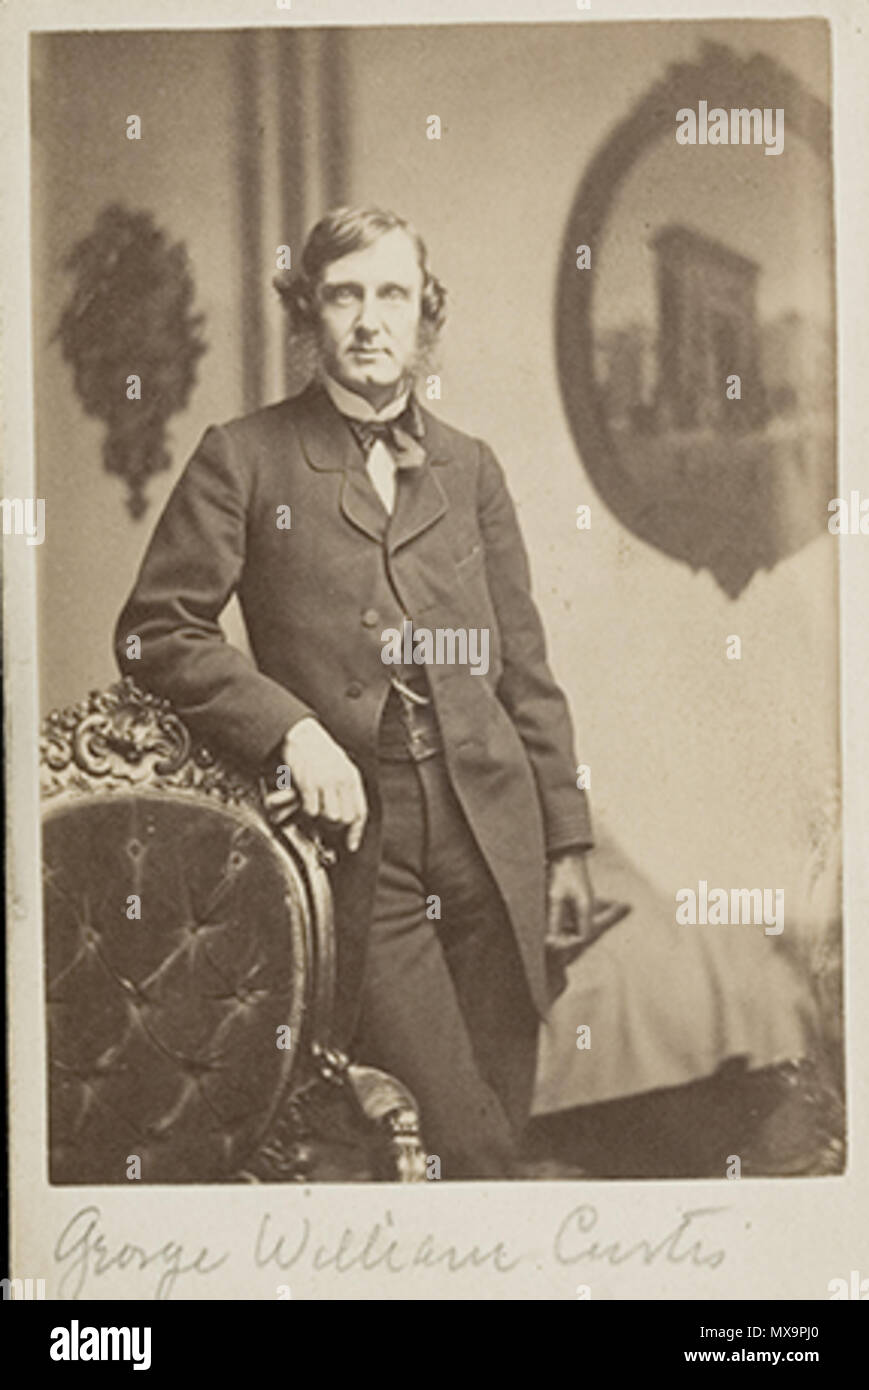 . Title: George William Curtis (1824-1892). Work Type: photograph; carte-de-visite. Creator: Whipple, John Adams (1822 - 1891), American. Date: 1860-1864. Dimensions: sight: 10 x 6 cm (3 15/16 x 2 3/8 in.). Materials/Techniques: Albumen silver print on card. Repository: Harvard Art Museum. between 1860 and 1864. John A. Whipple 241 GeorgeWilliamCurtis 1860s byJAWhipple Harvard Stock Photo